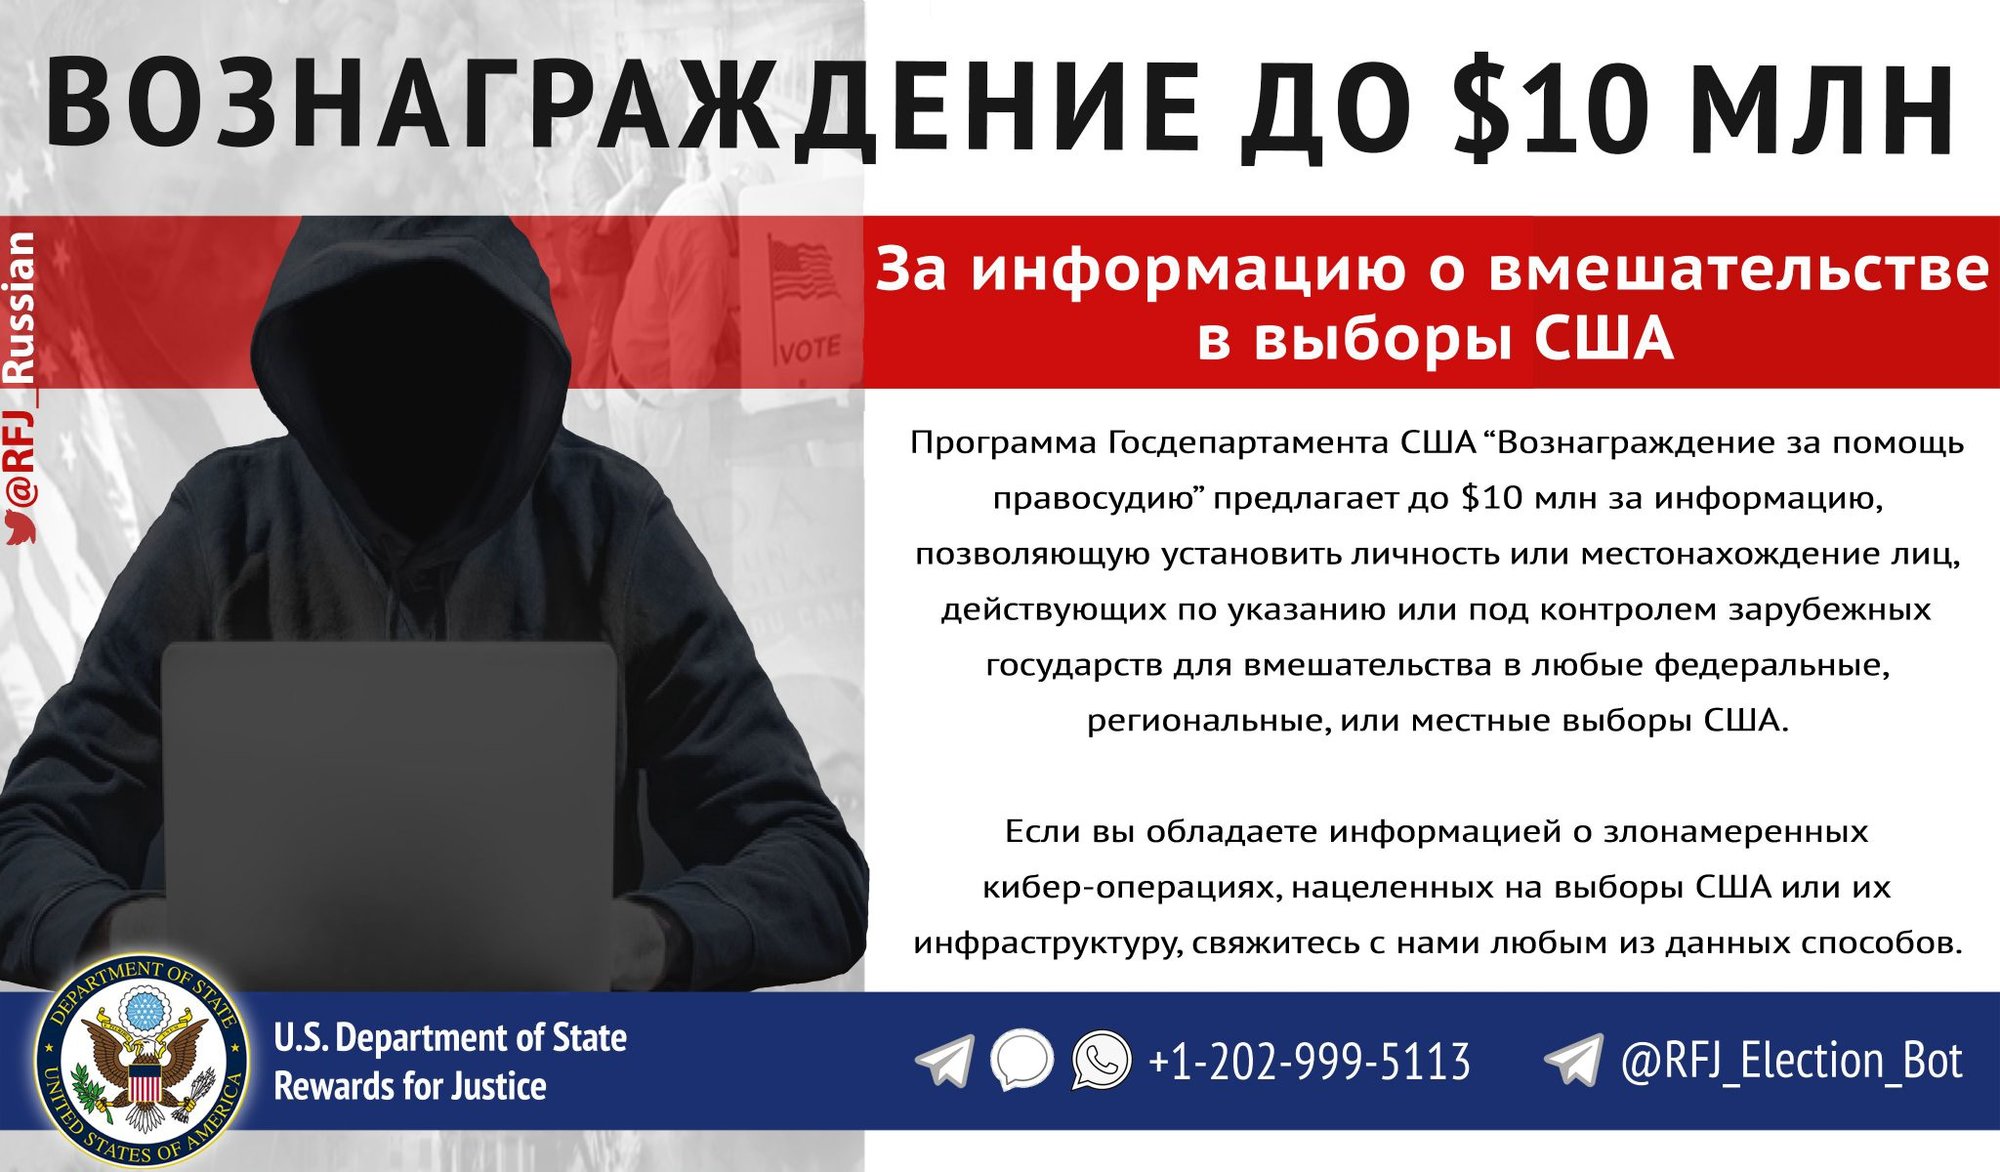 An image distributed online by the State Department’s Rewards for Justice program, offering a $10 million reward for information related to election interference. Photo from Twitter.